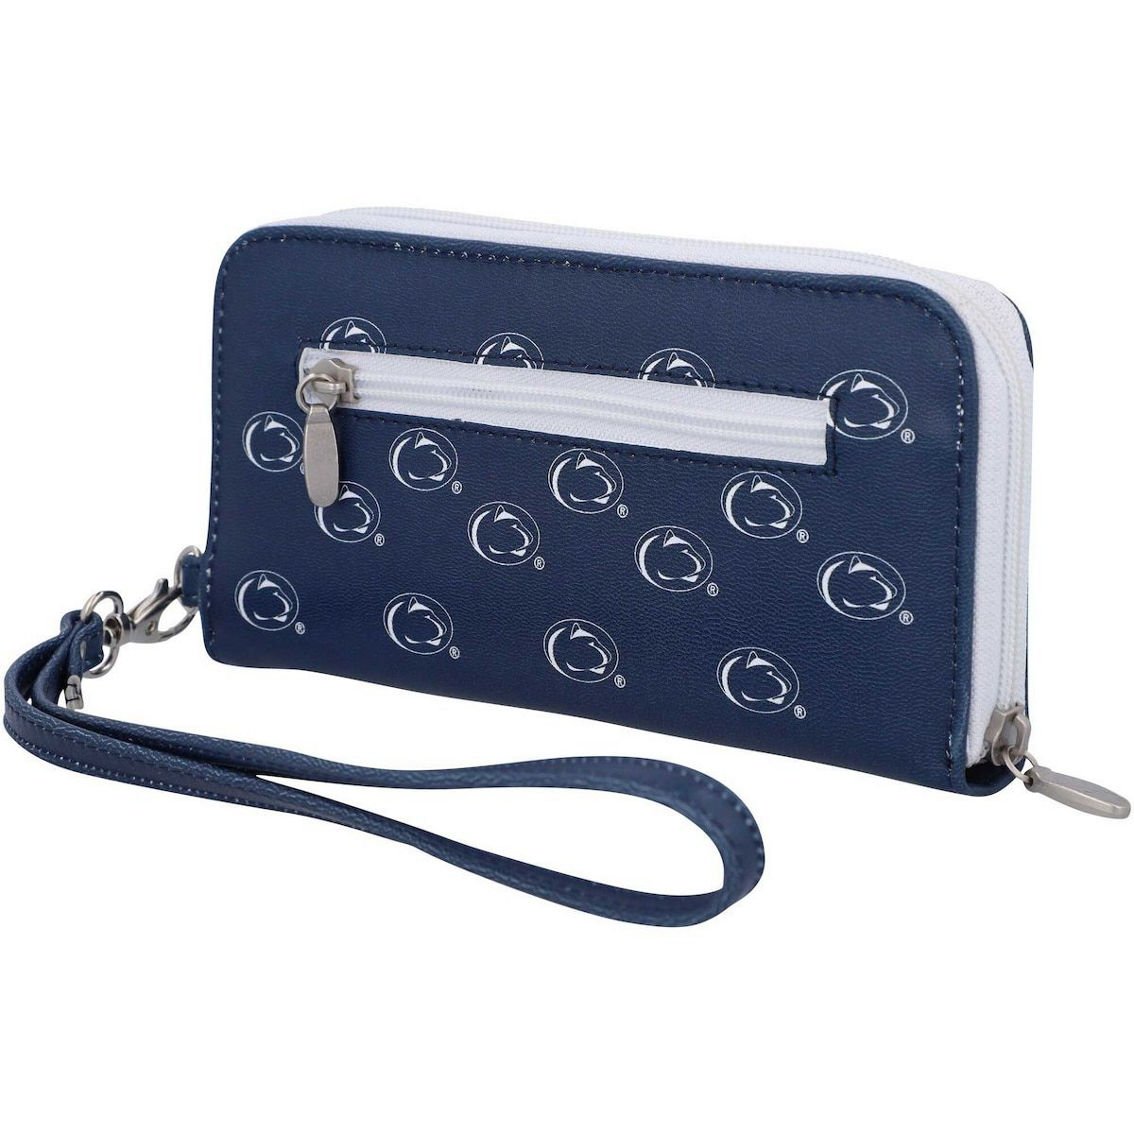 Eagles Wings Women's Penn State Nittany Lions Zip-Around Wristlet Wallet - Image 3 of 4